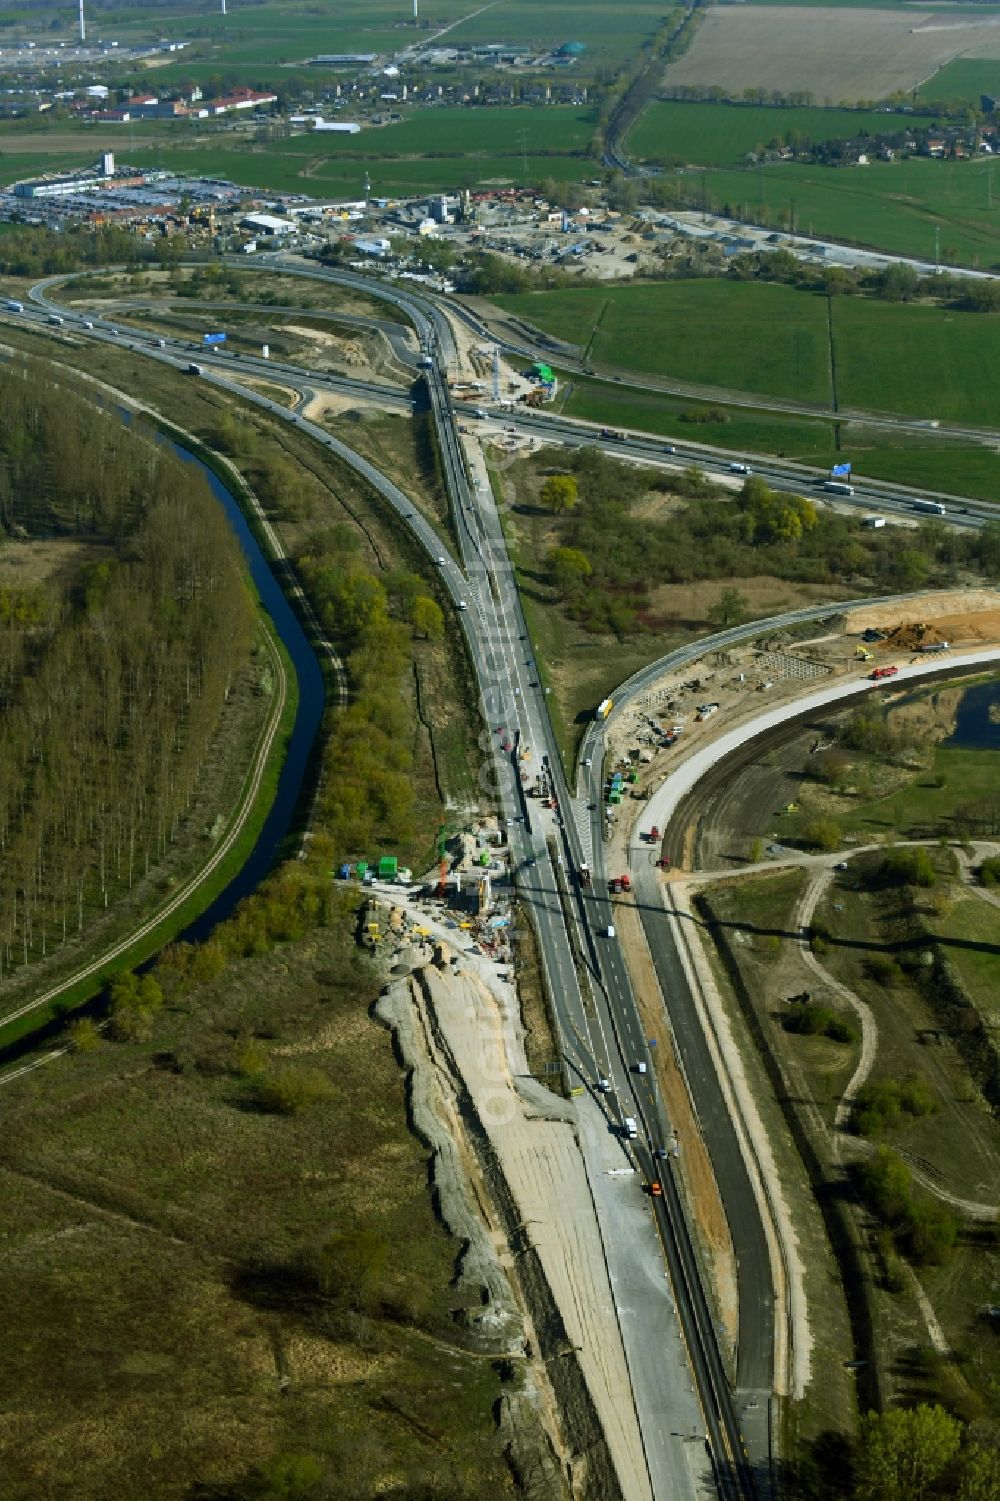 Schönerlinde from the bird's eye view: Construction to extend the traffic flow at the intersection- motorway A 114 - A10 - Dreieck Pankow in Schoenerlinde in the state Brandenburg, Germany